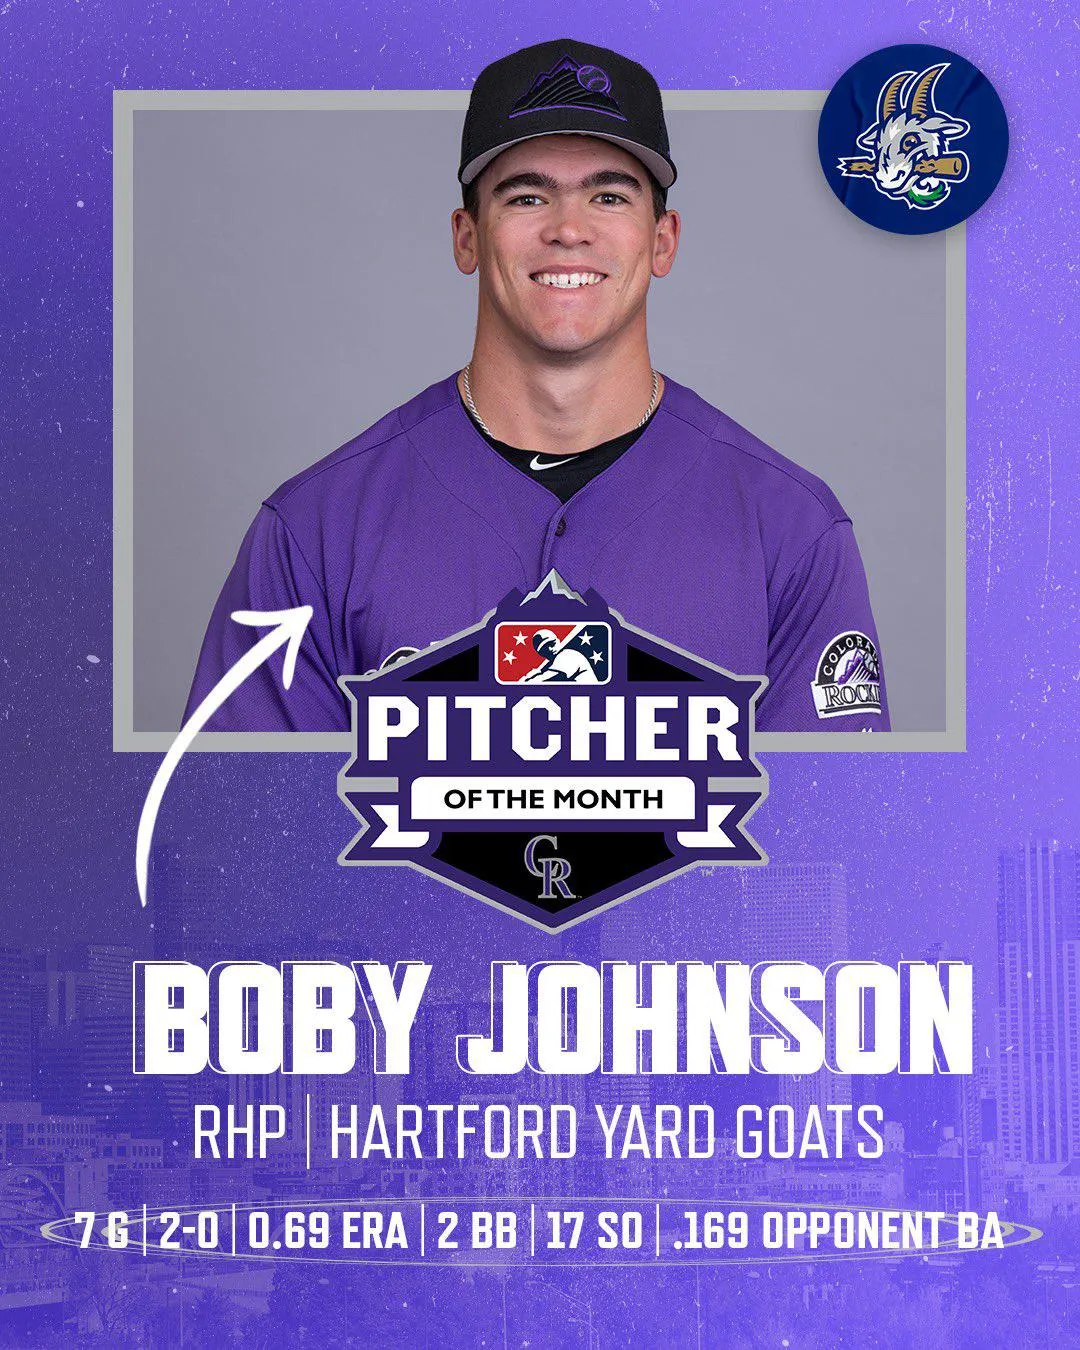 Uncover the secrets to pitching success through personalized coaching by Boby Johnson.